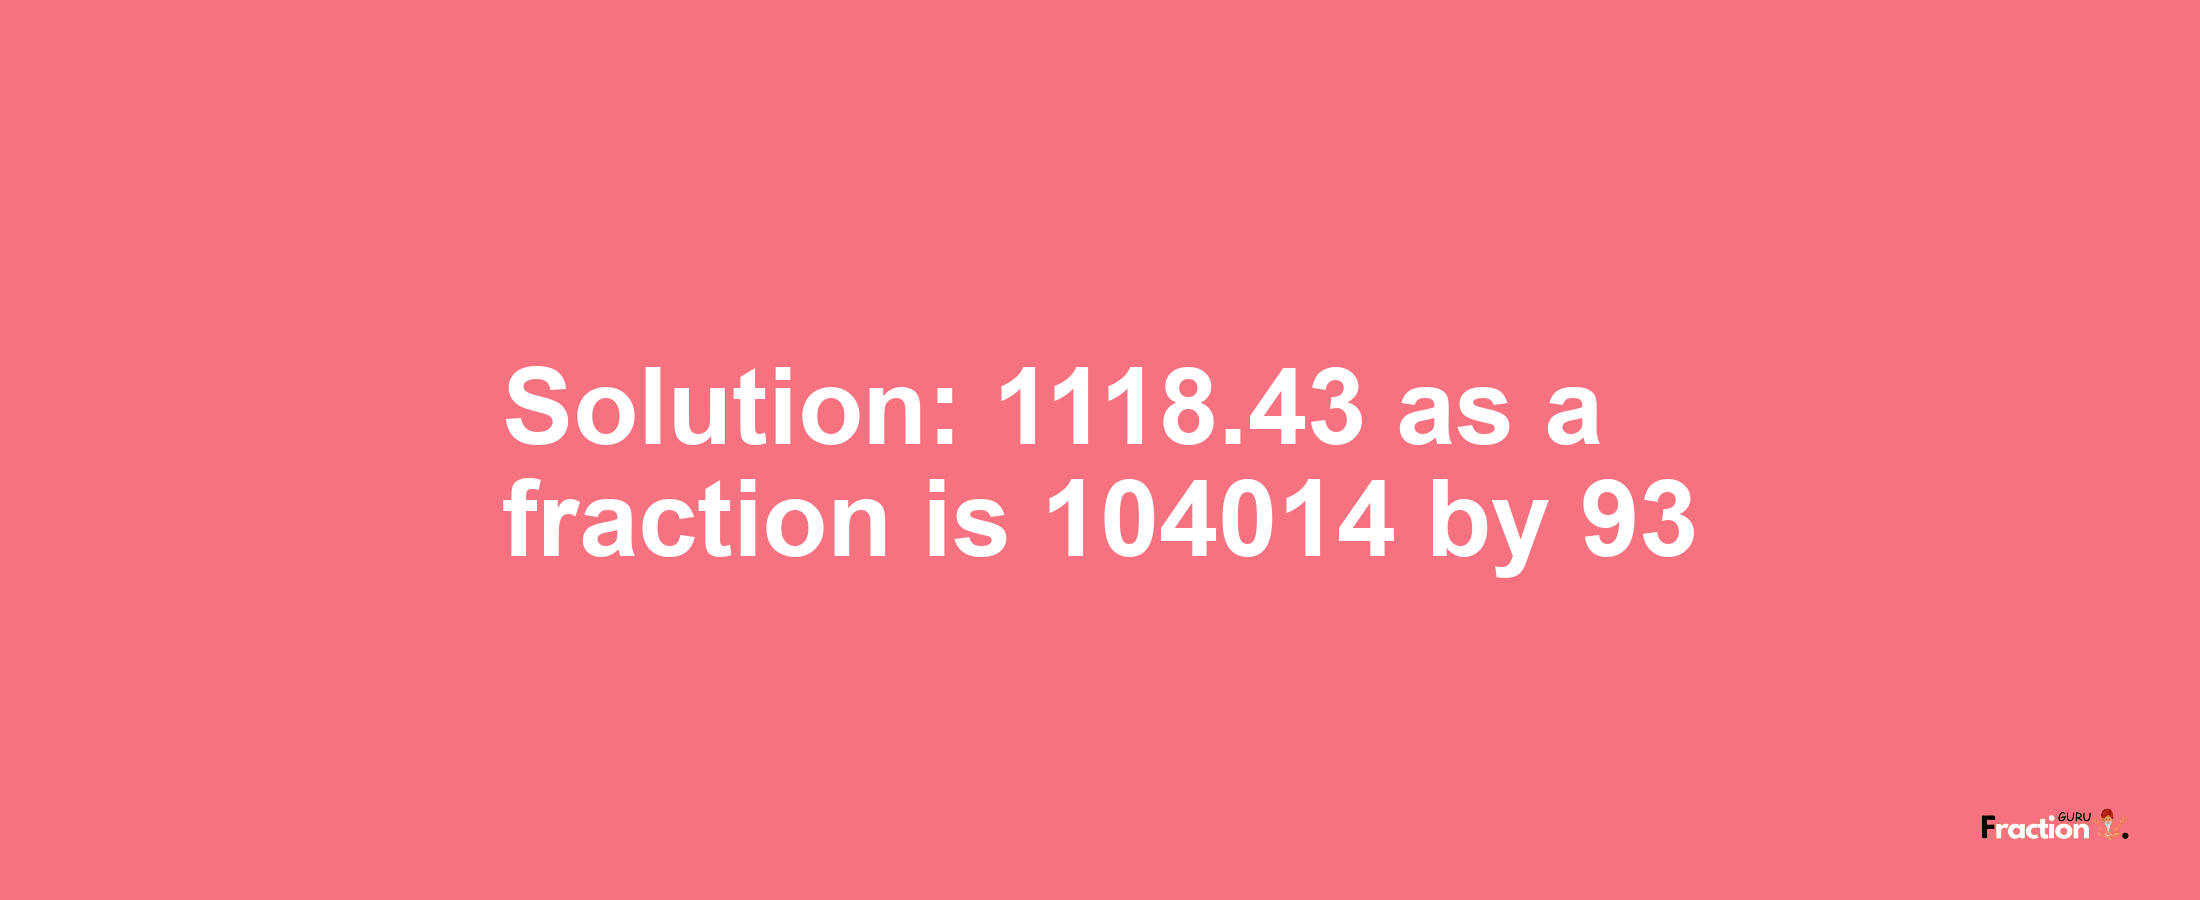 Solution:1118.43 as a fraction is 104014/93